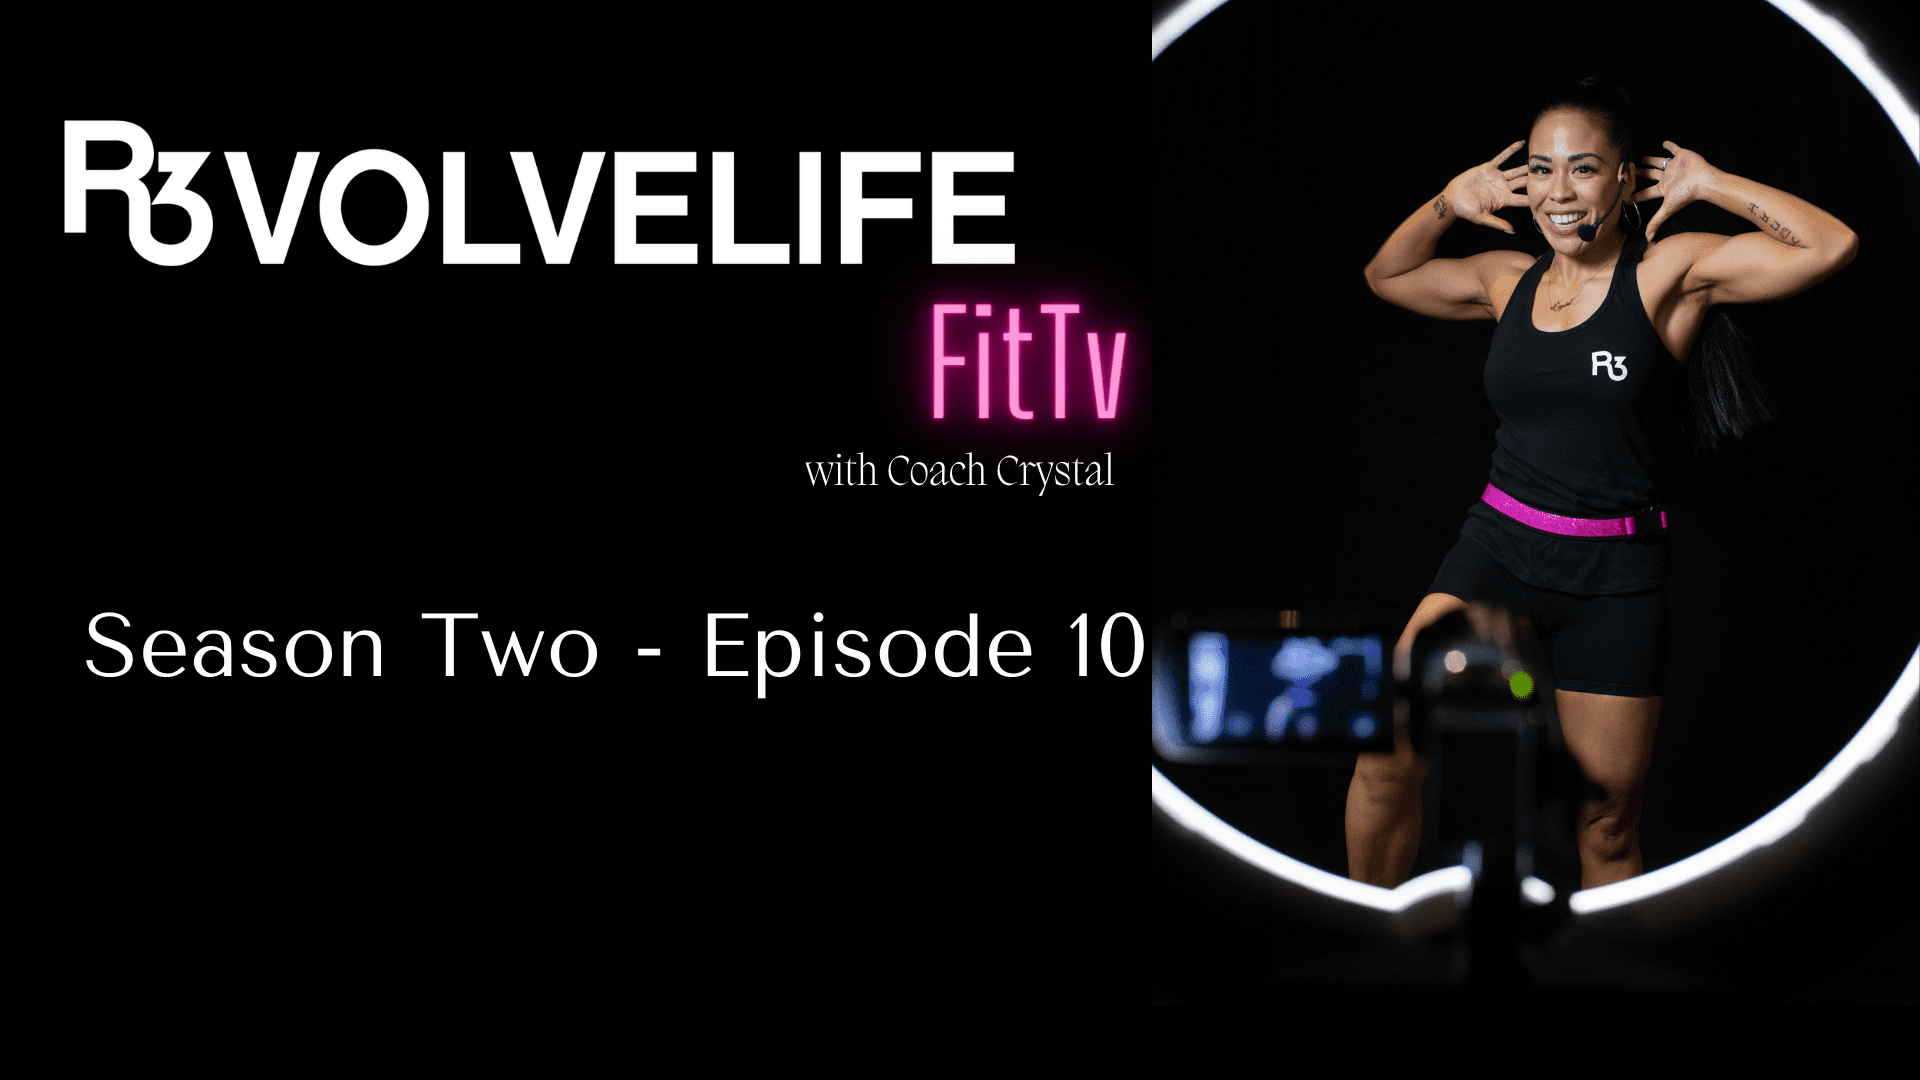 R3VOLVELIFE FIT TV with Coach Crystal – Episode 10